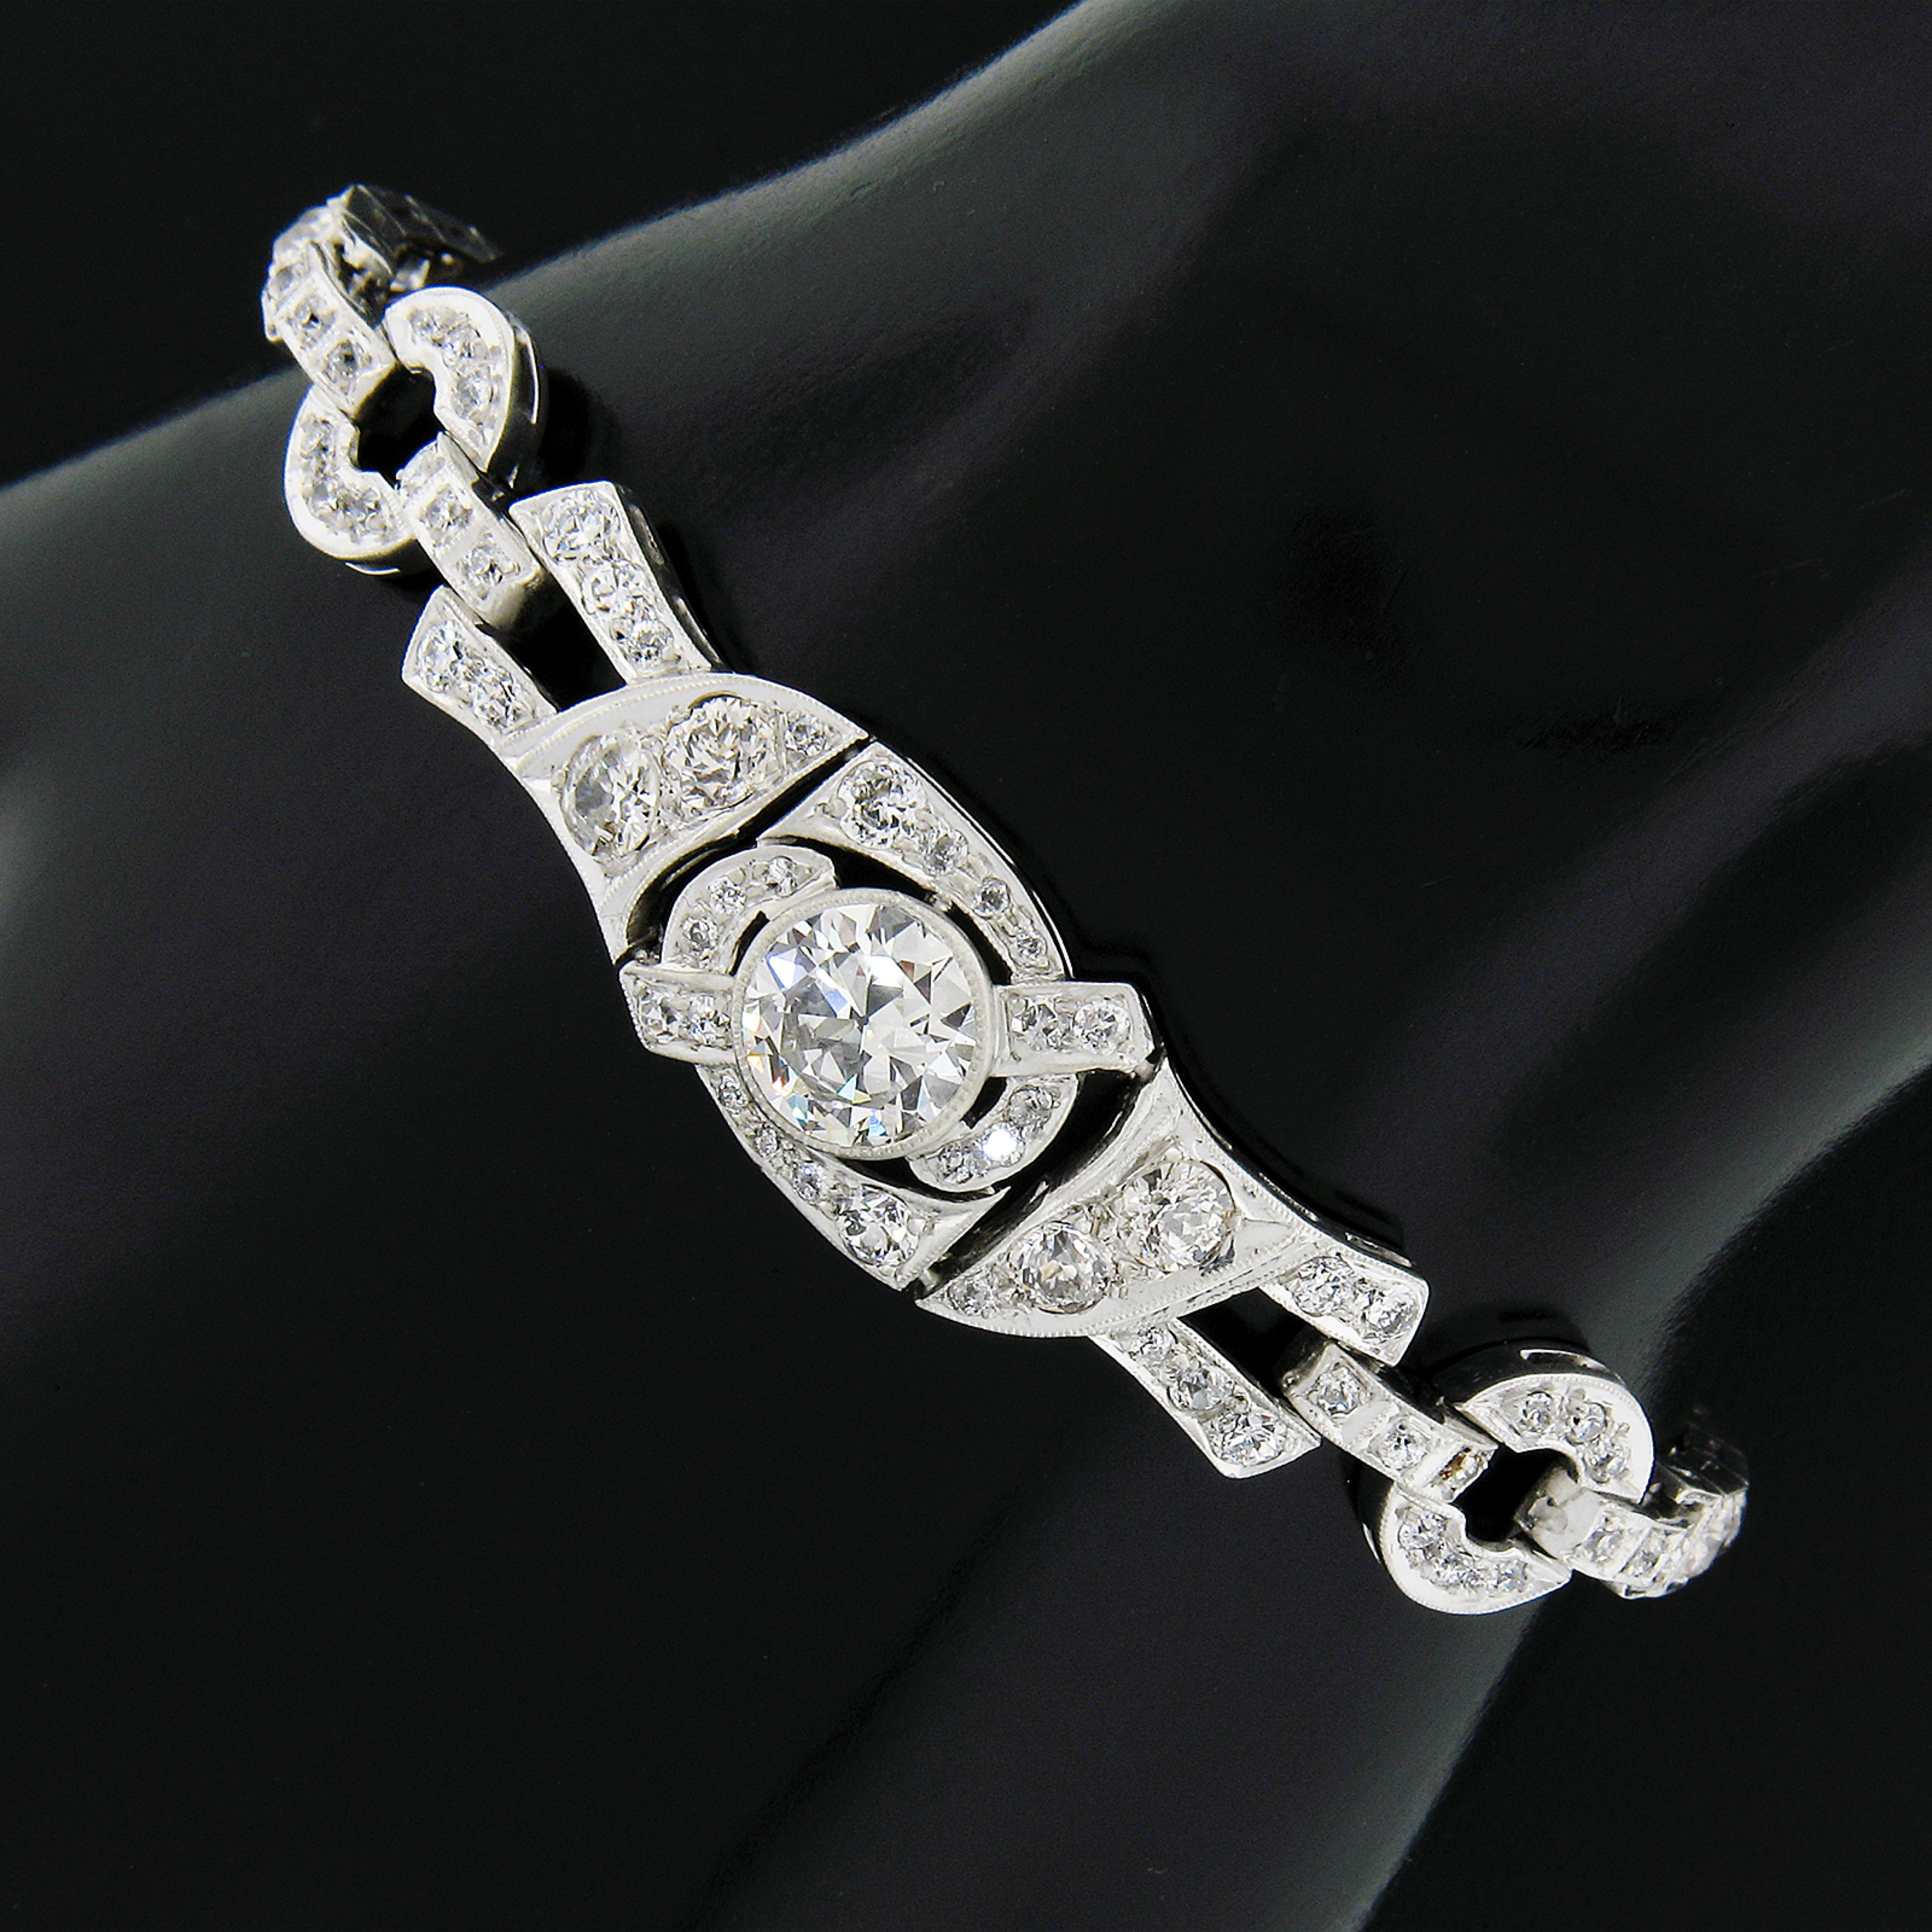 Here we have an absolutely stunning diamond drenched bracelet, which was crafted from solid .900 platinum during the art deco period, featuring a large, GIA certified, old European cut diamond neatly bezel set at at its center. This large stone is